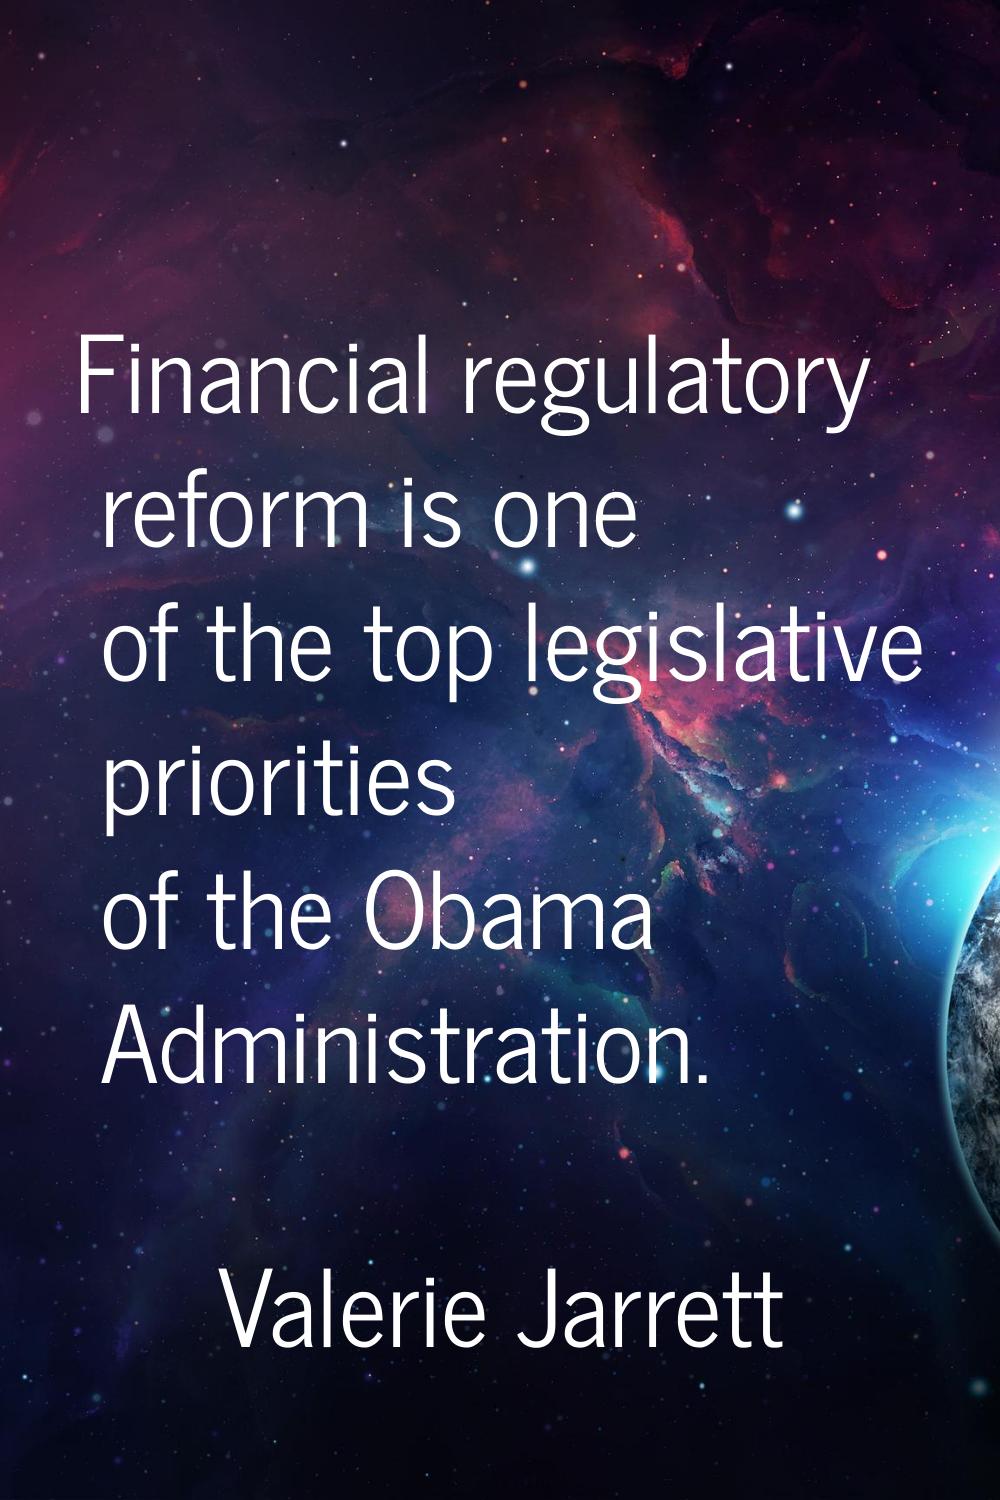 Financial regulatory reform is one of the top legislative priorities of the Obama Administration.